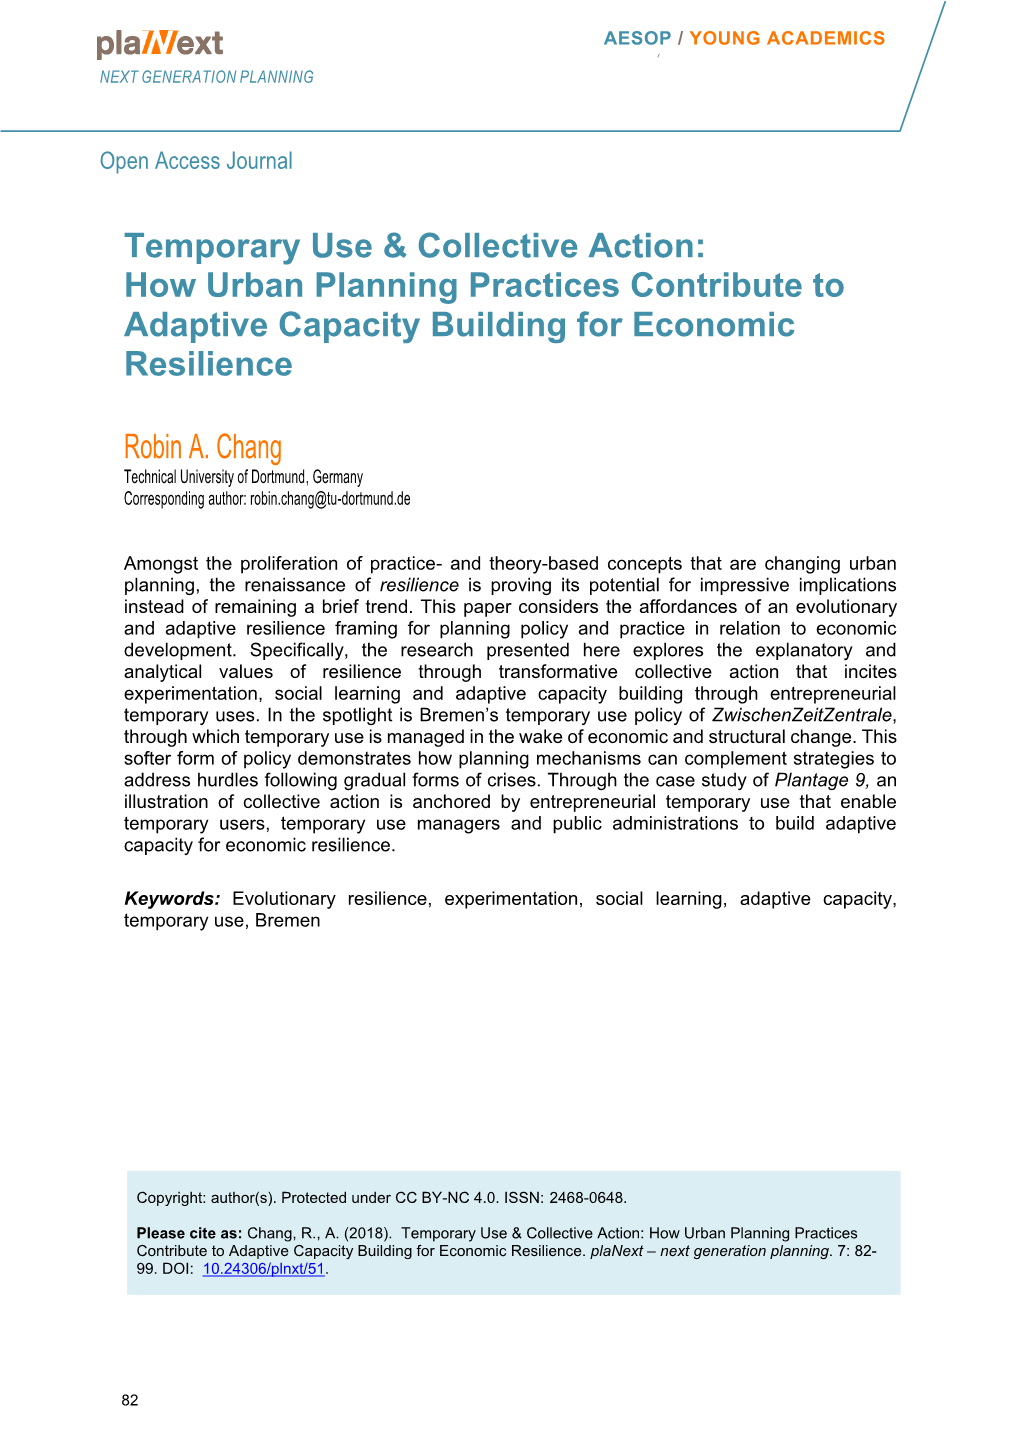 Temporary Use & Collective Action: How Urban Planning Practices